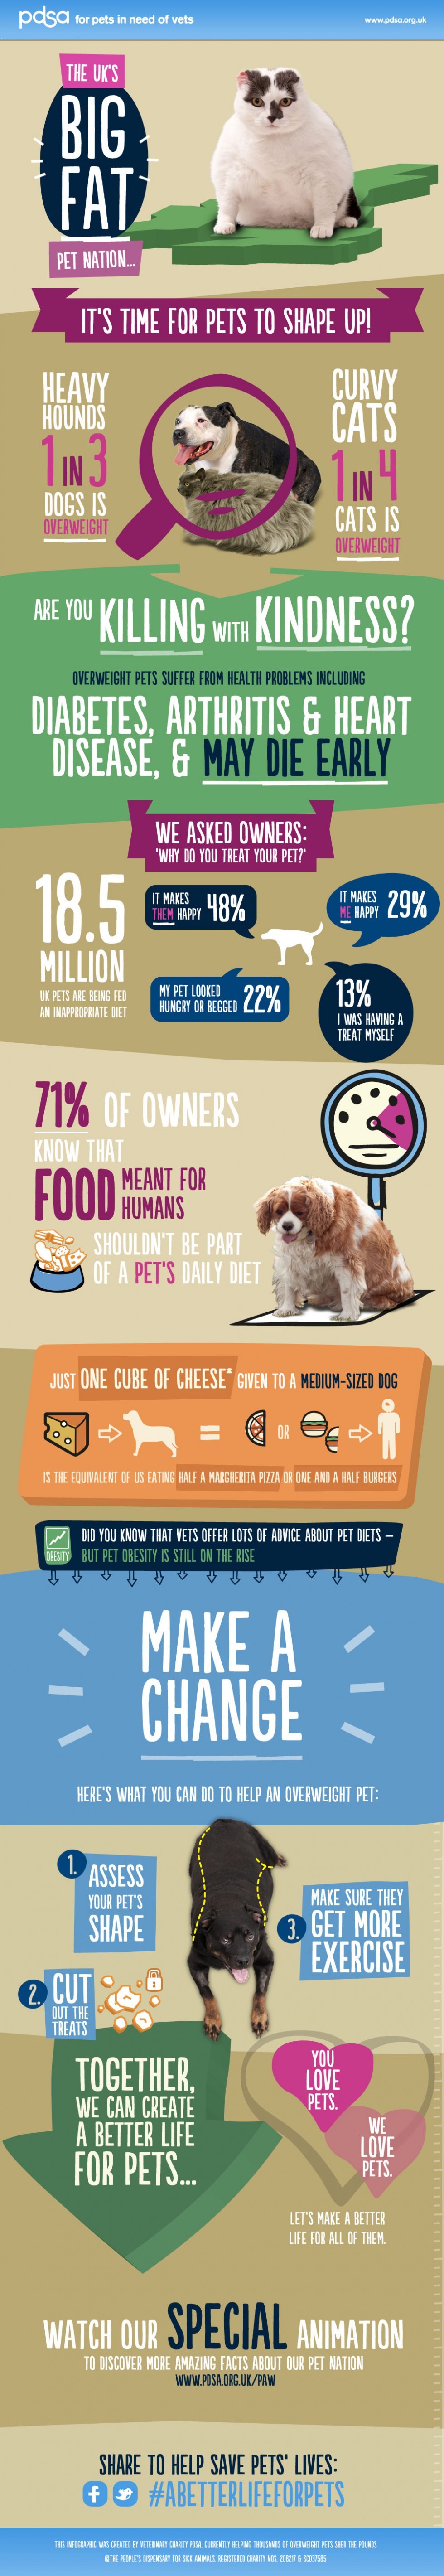 Big Fat Pet Nation UK: Obese Pet Facts - Infographic